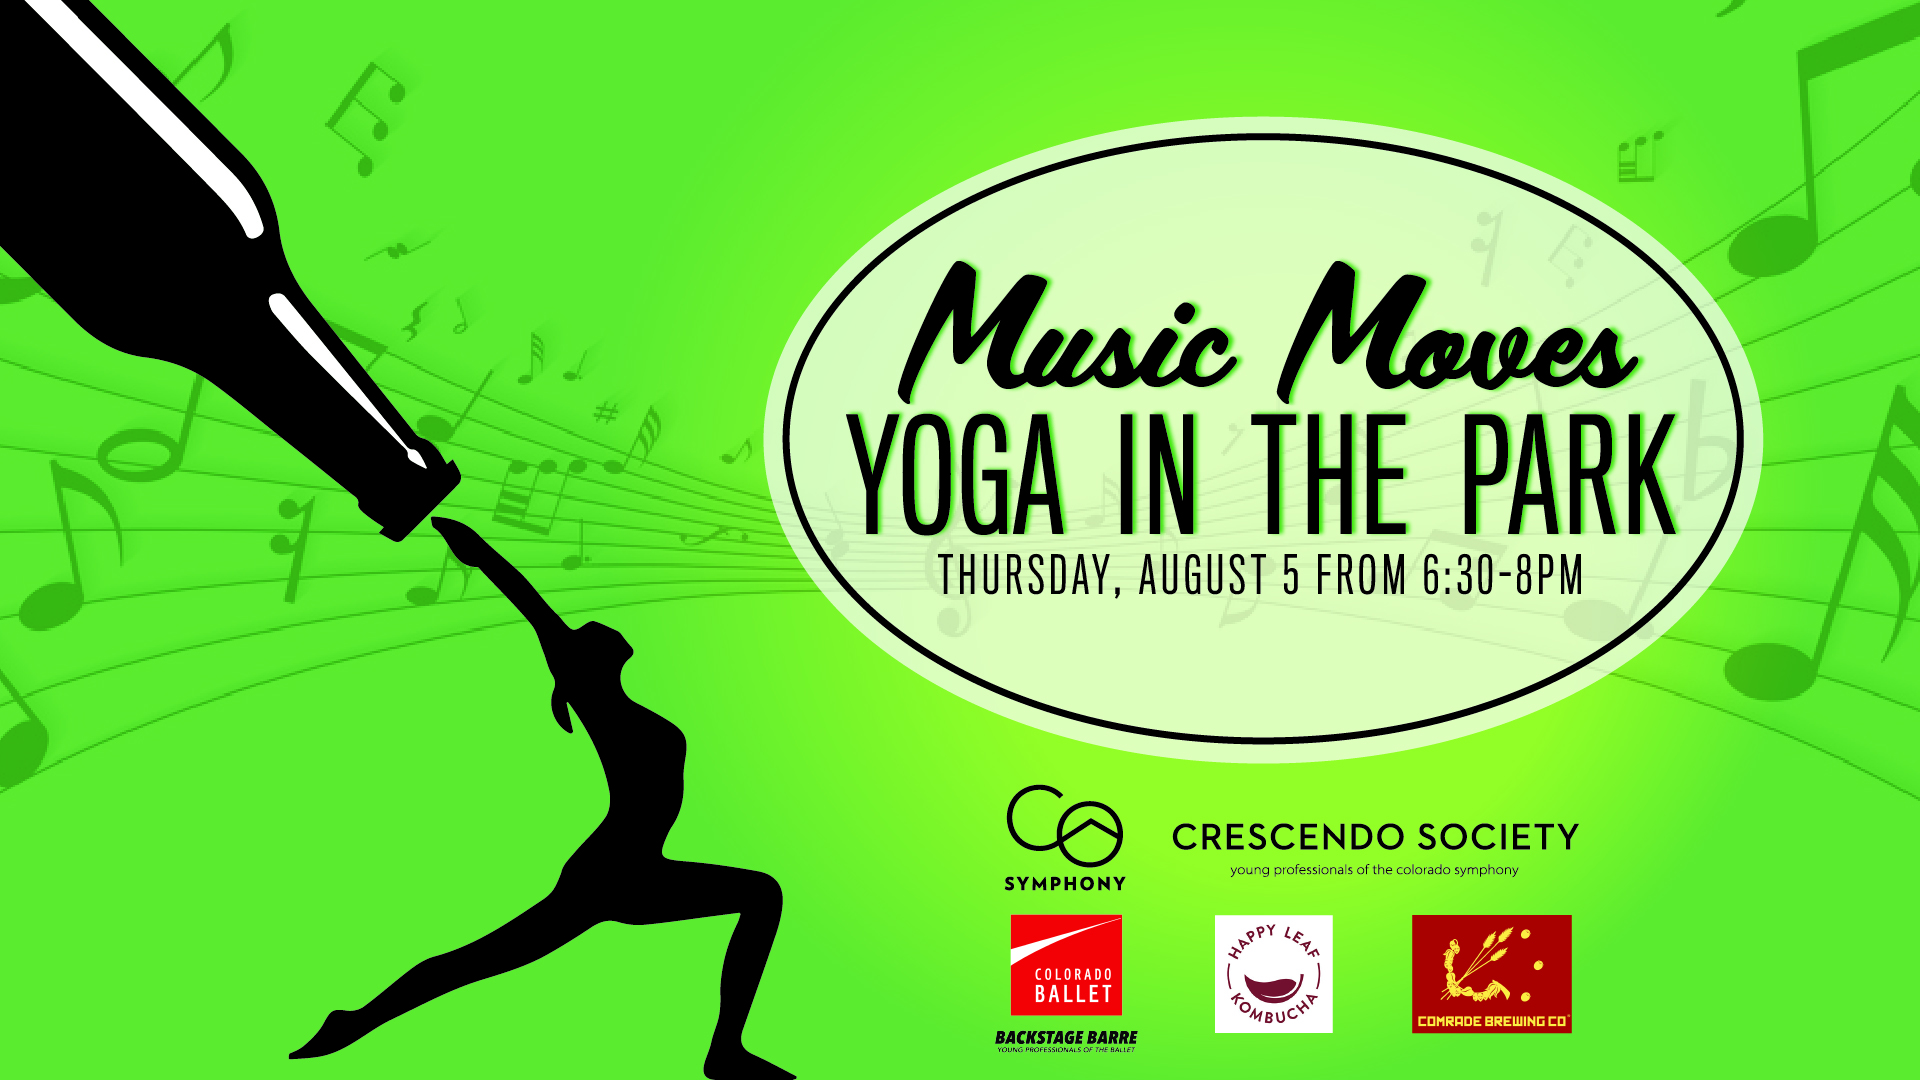 Music Moves - Yoga in the Park Event Image